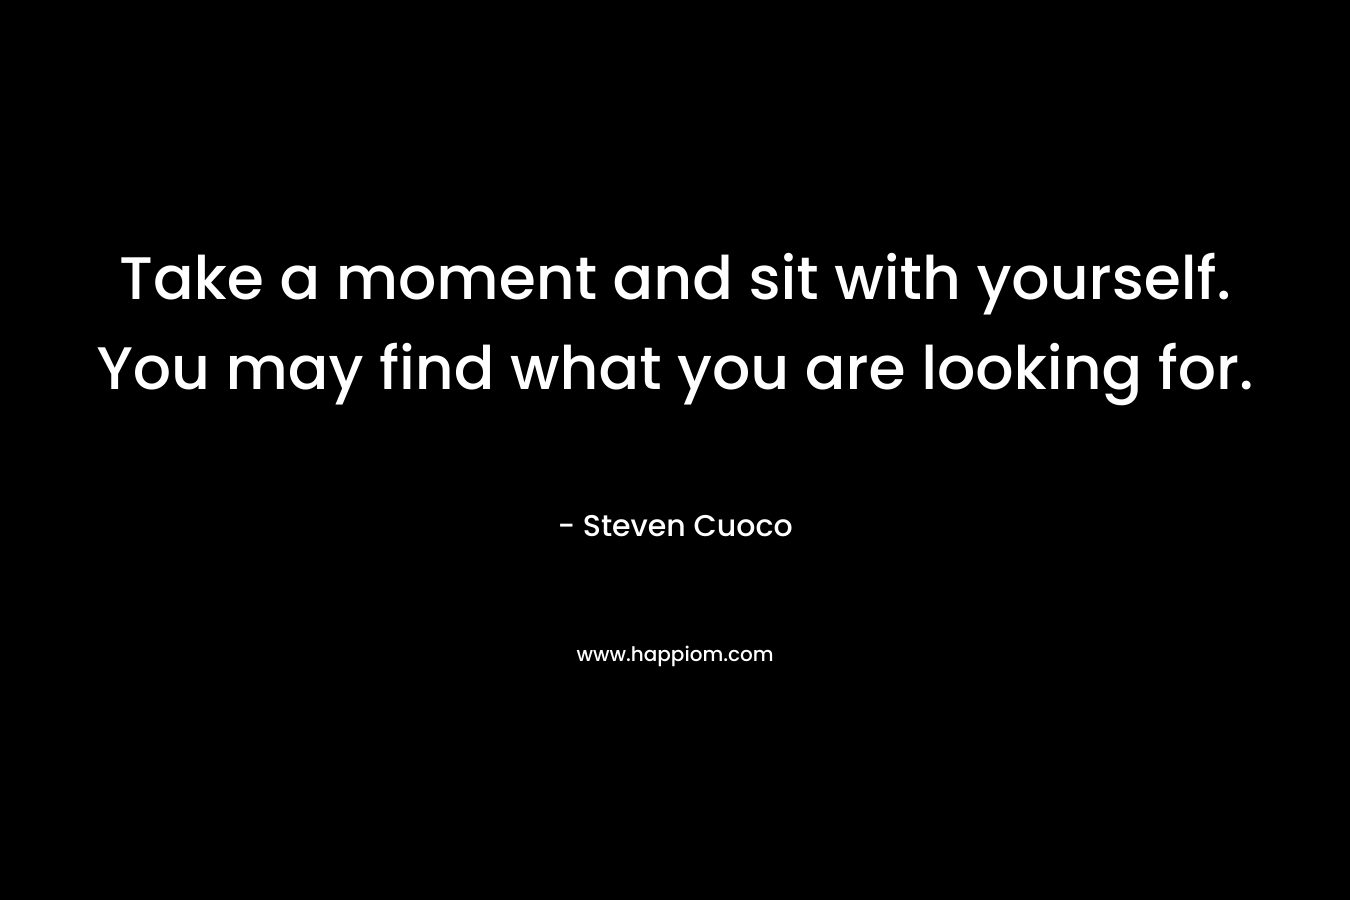 Take a moment and sit with yourself. You may find what you are looking for.